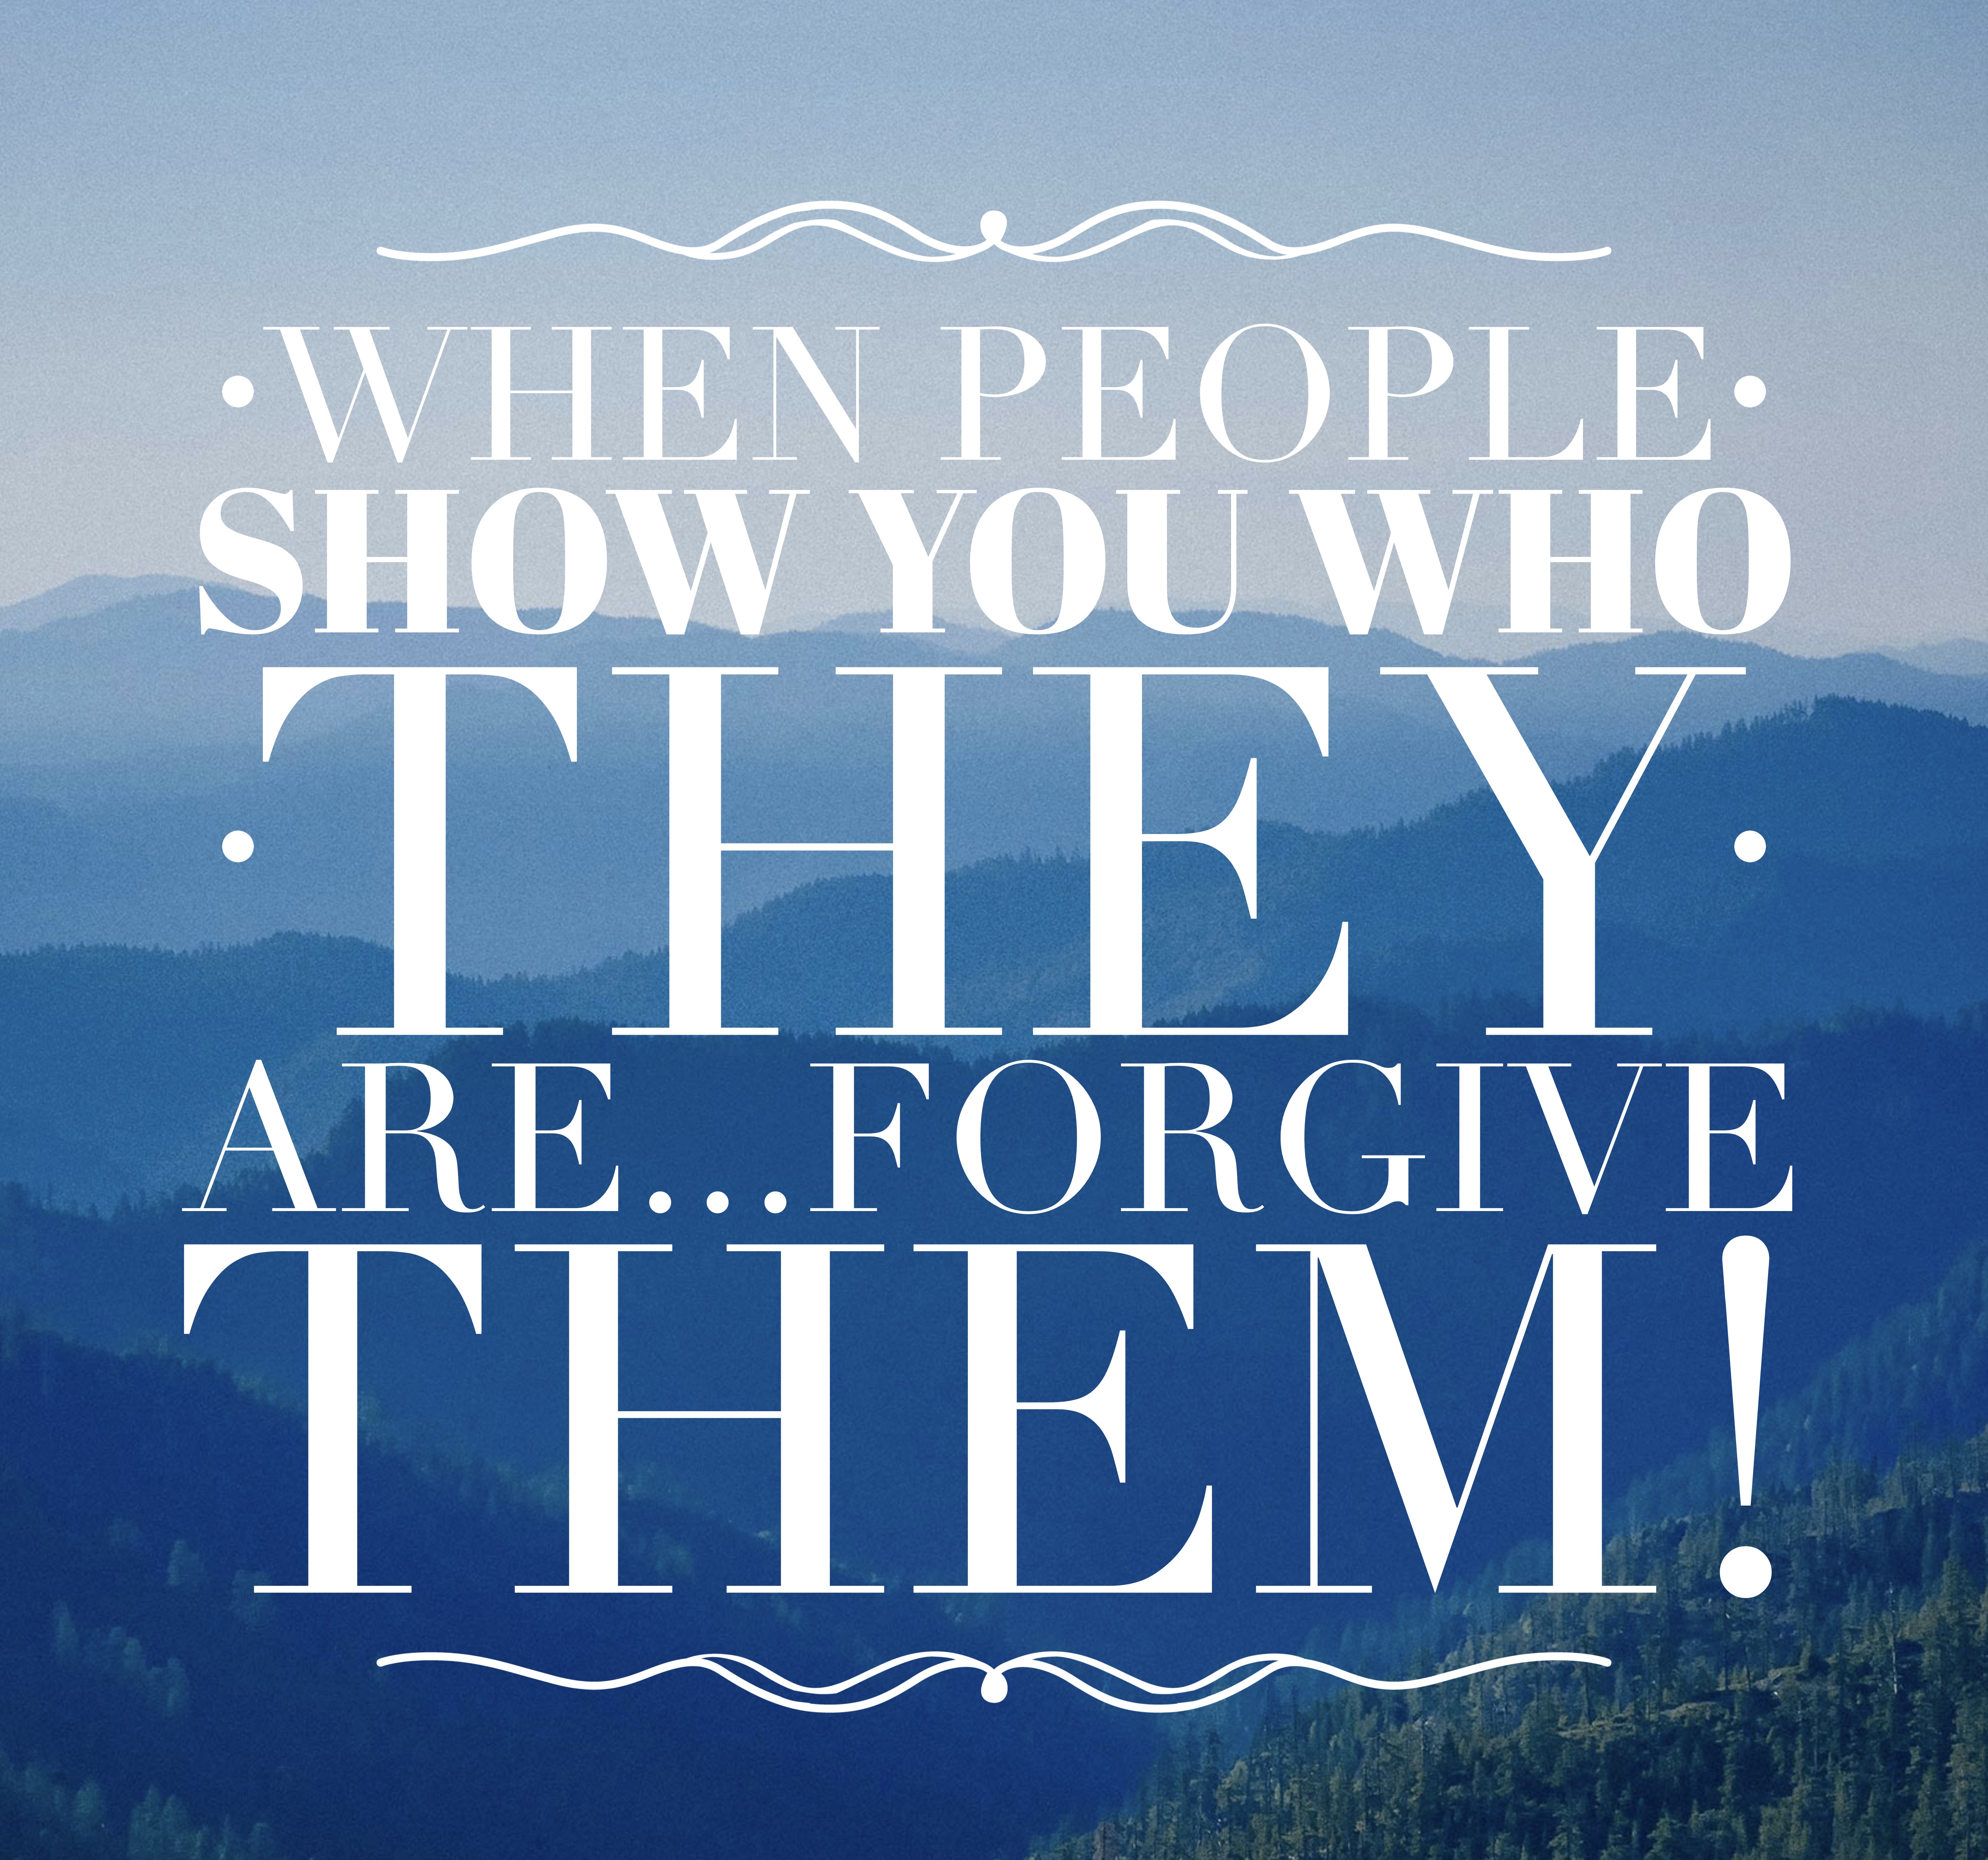 When people show you who they are…forgive them.